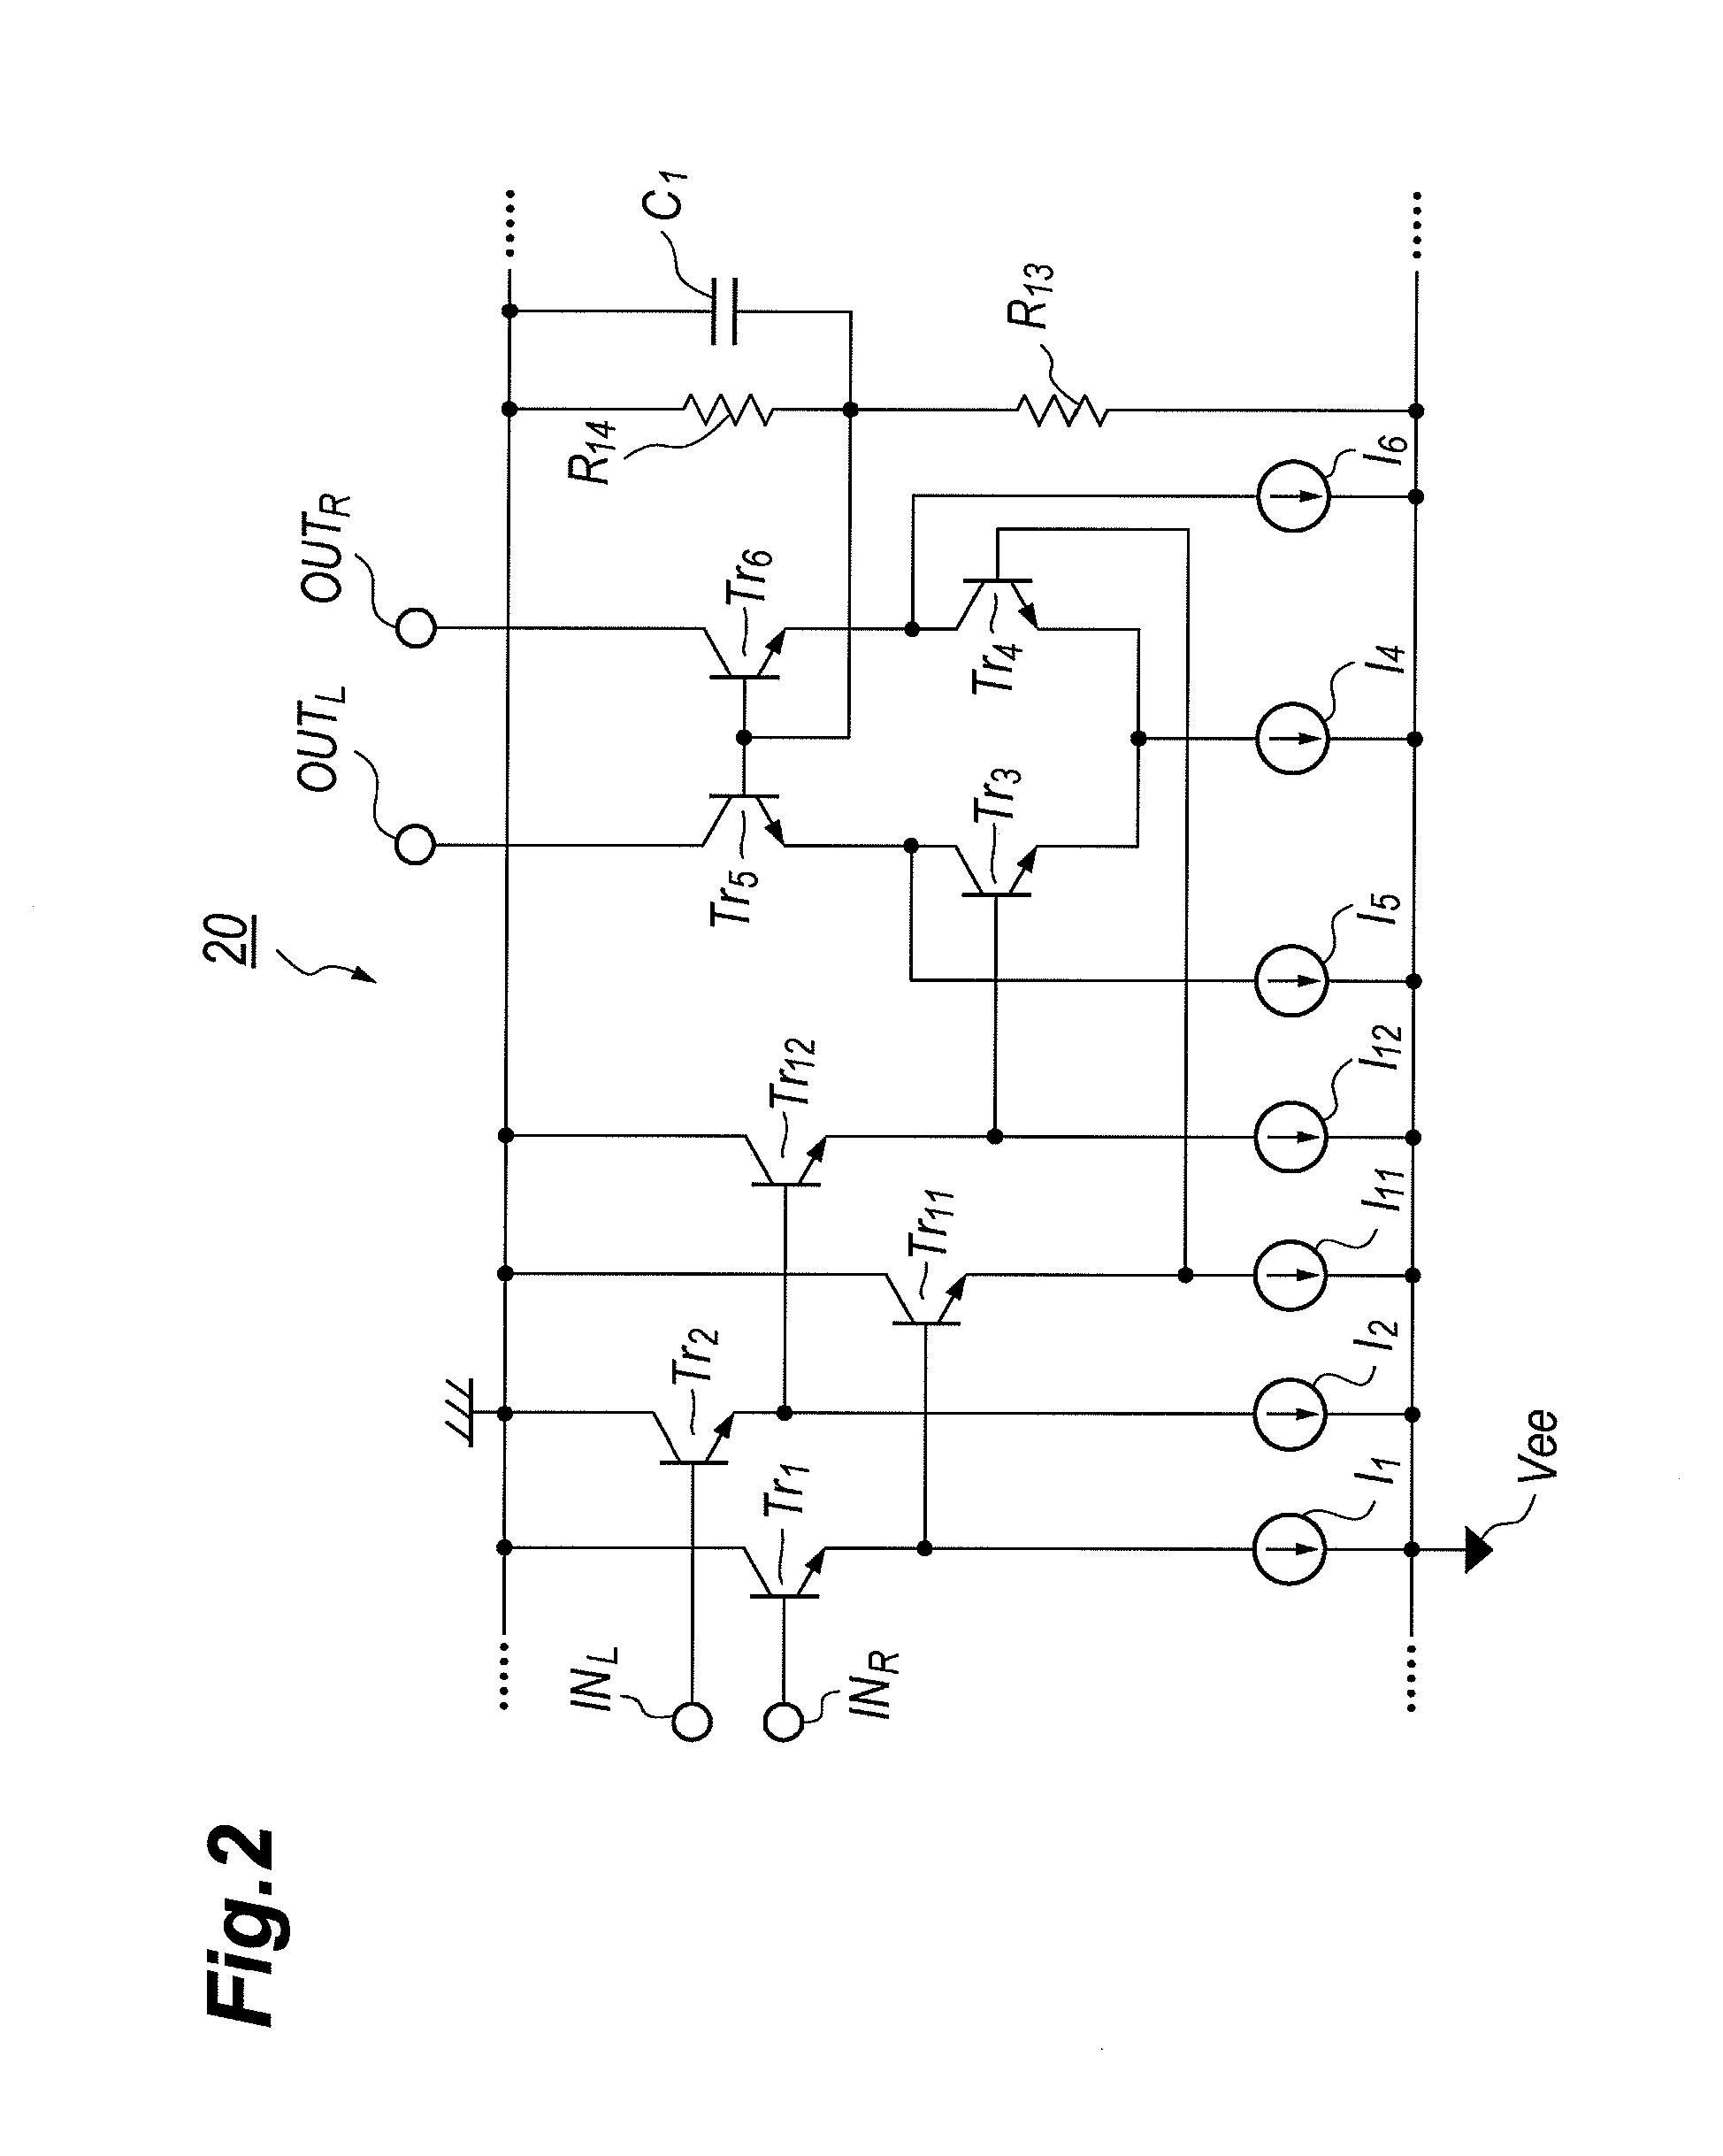 Traveling wave amplifier with suppressed jitter